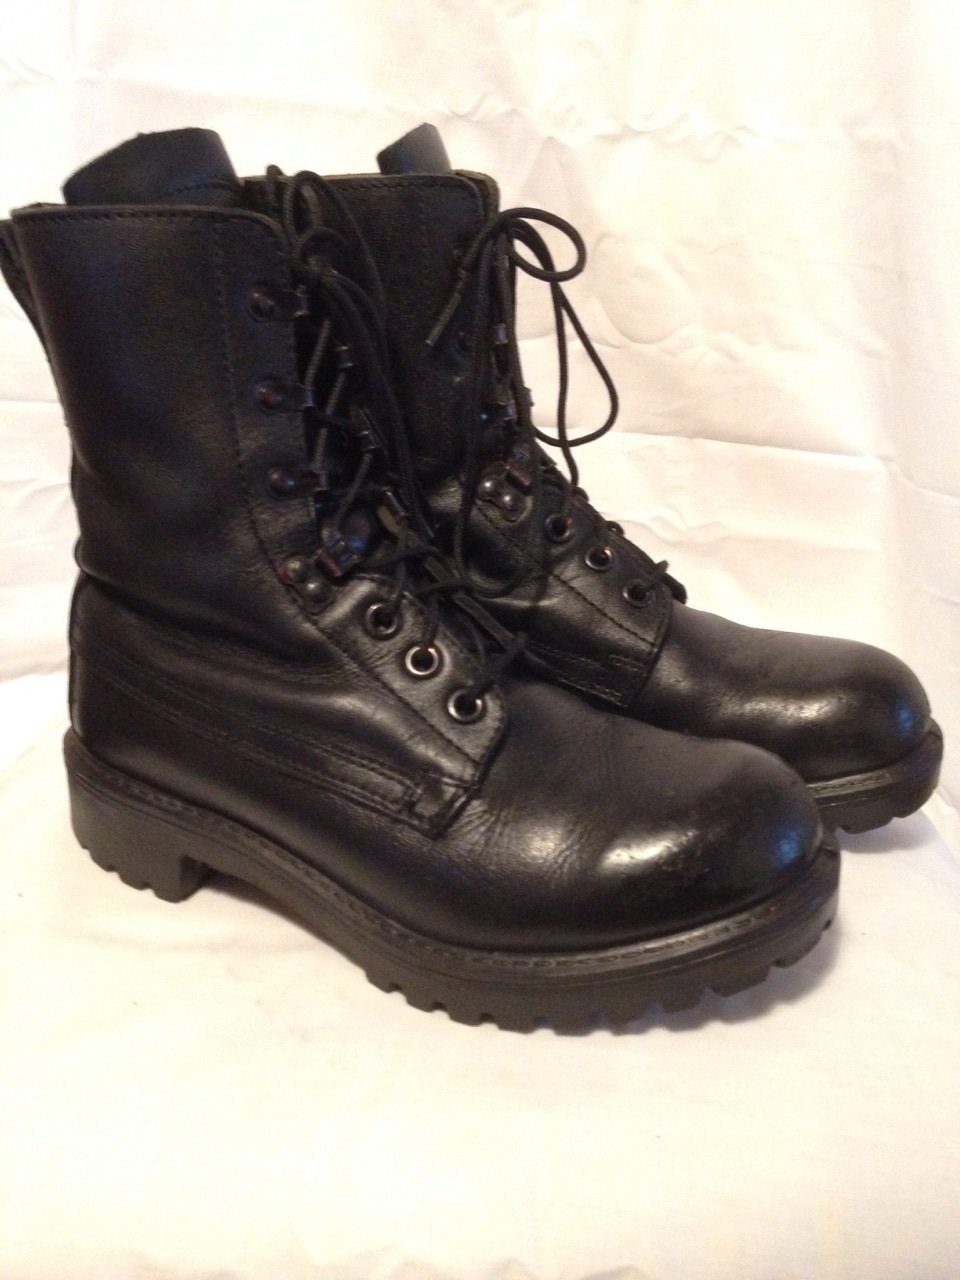 British Army Assault Boots Size 9M